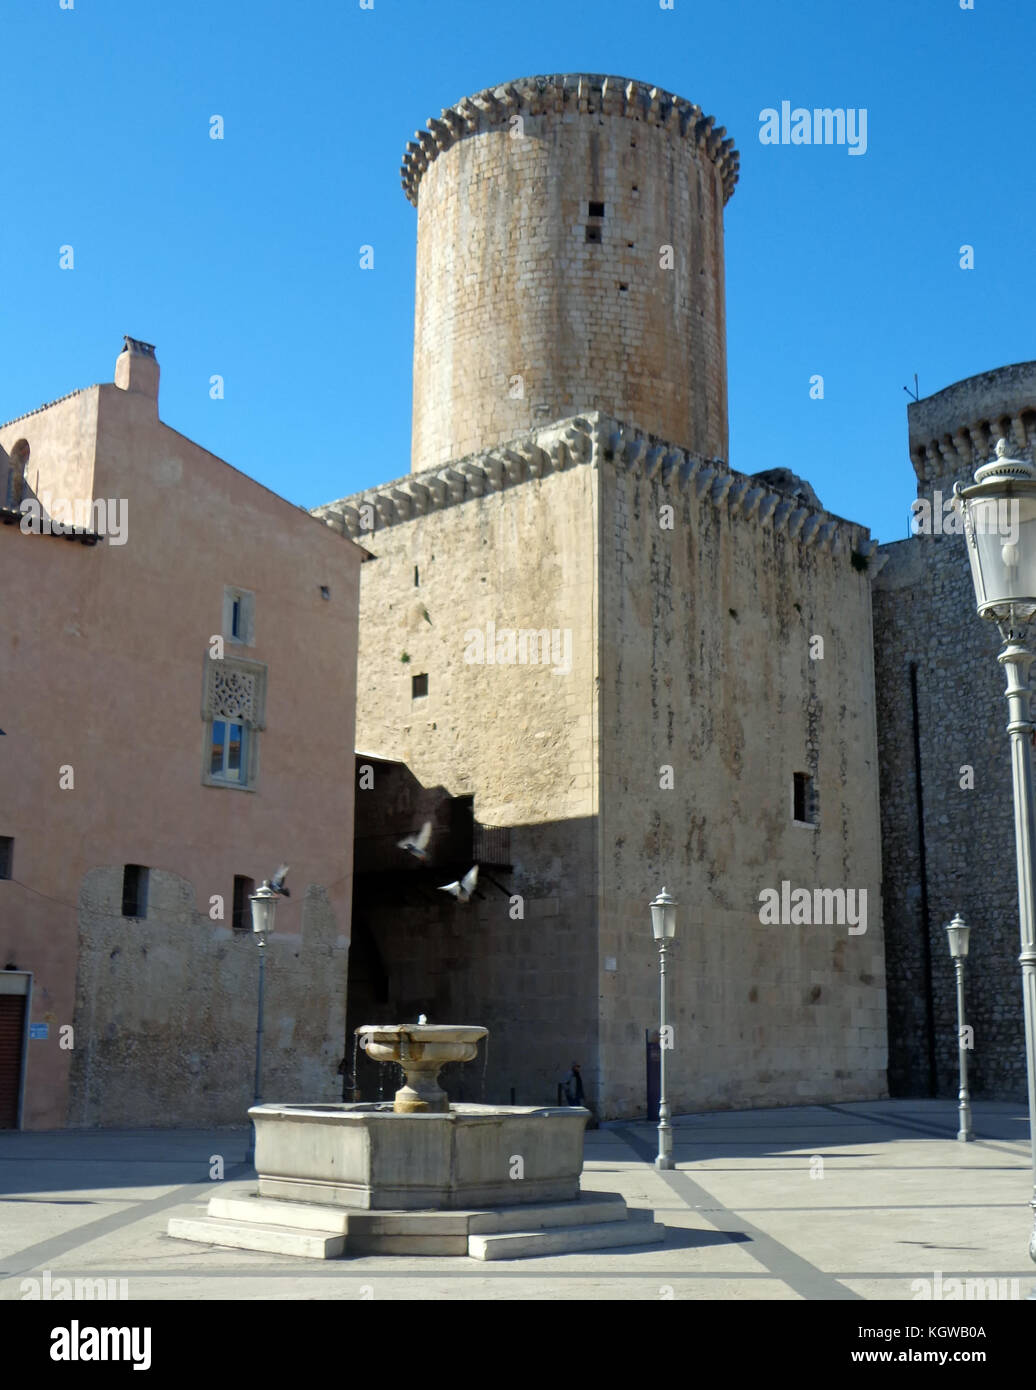 Fondi, Italy - 10 june 2013: Baronial Caetani Castle built in 1319. Fondi's urban core is located in the south pontino halfway between Rome and Naples Stock Photo